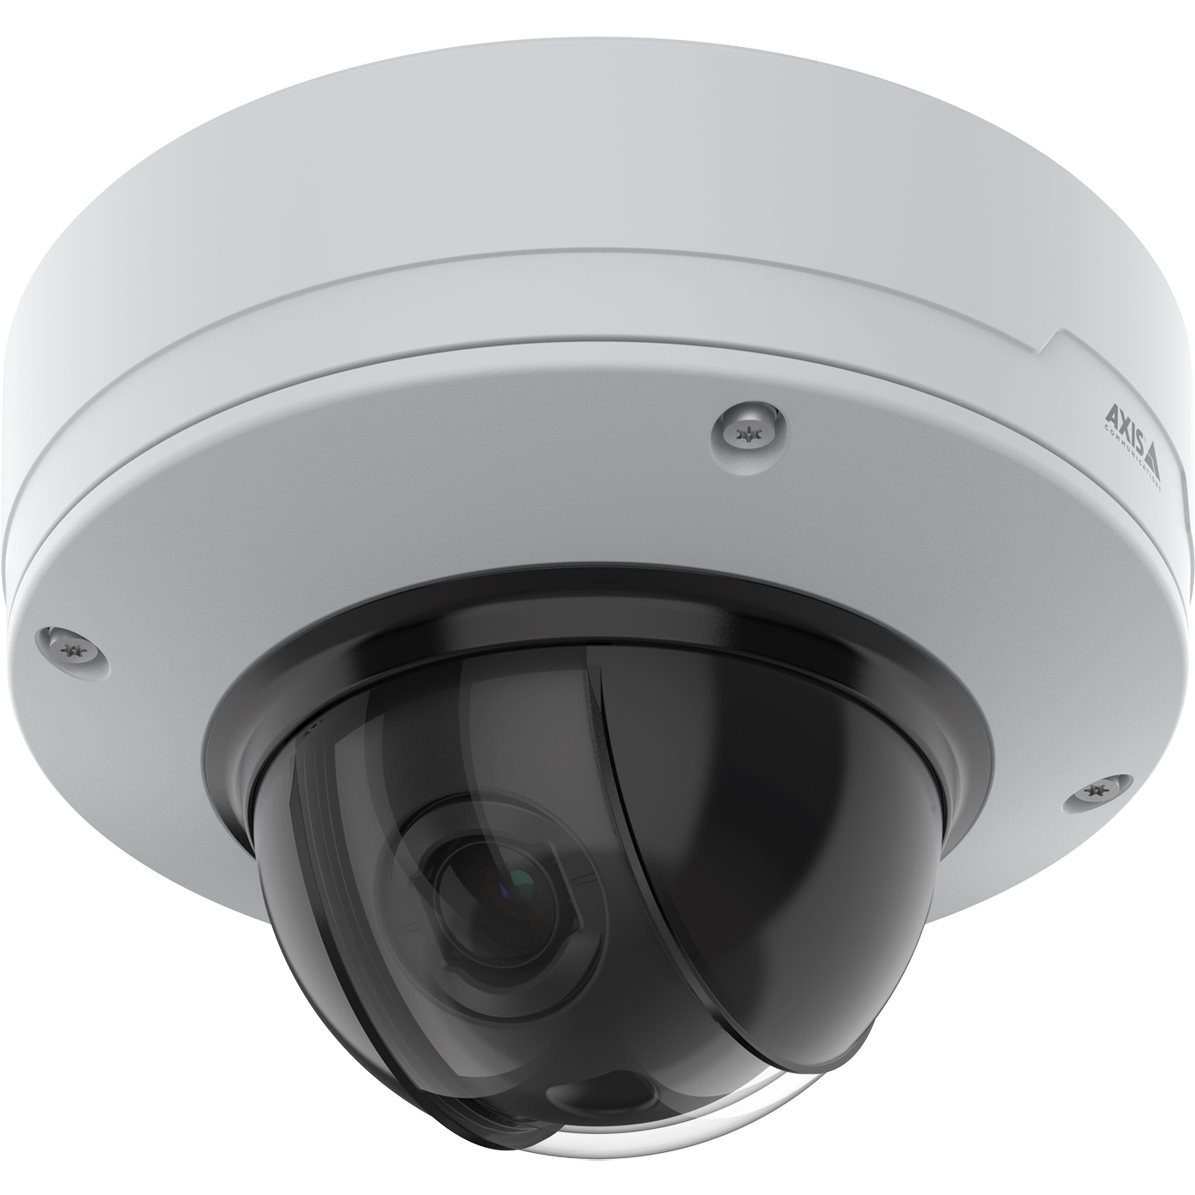 Camra Axis Q3536-LVE 9MM DOME CAMERA 02054-001